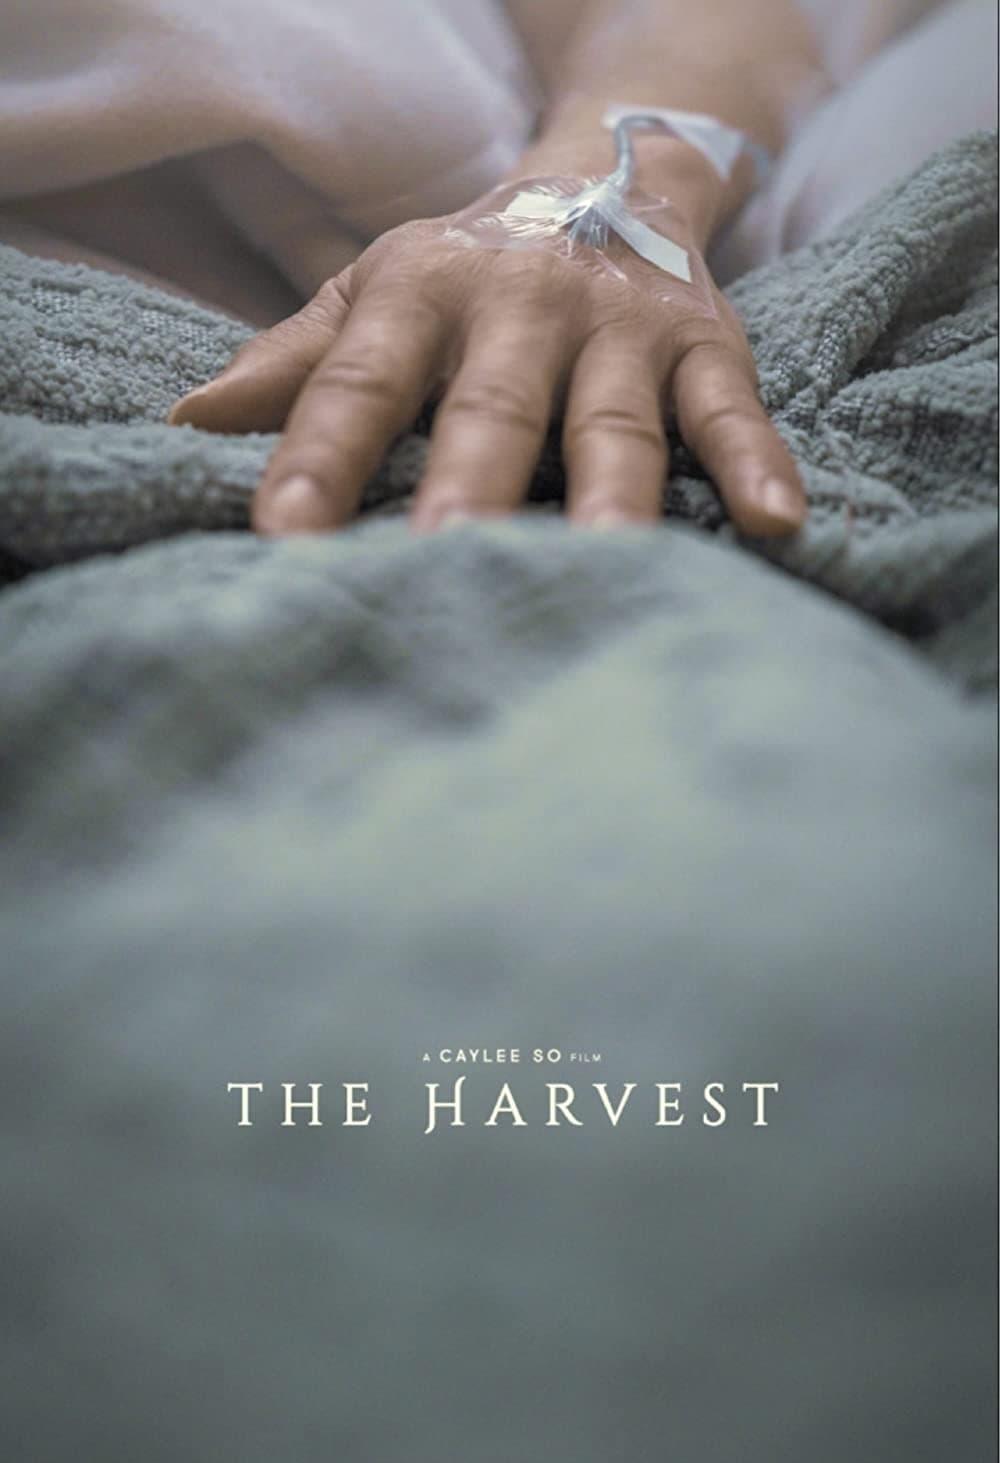 The Harvest poster